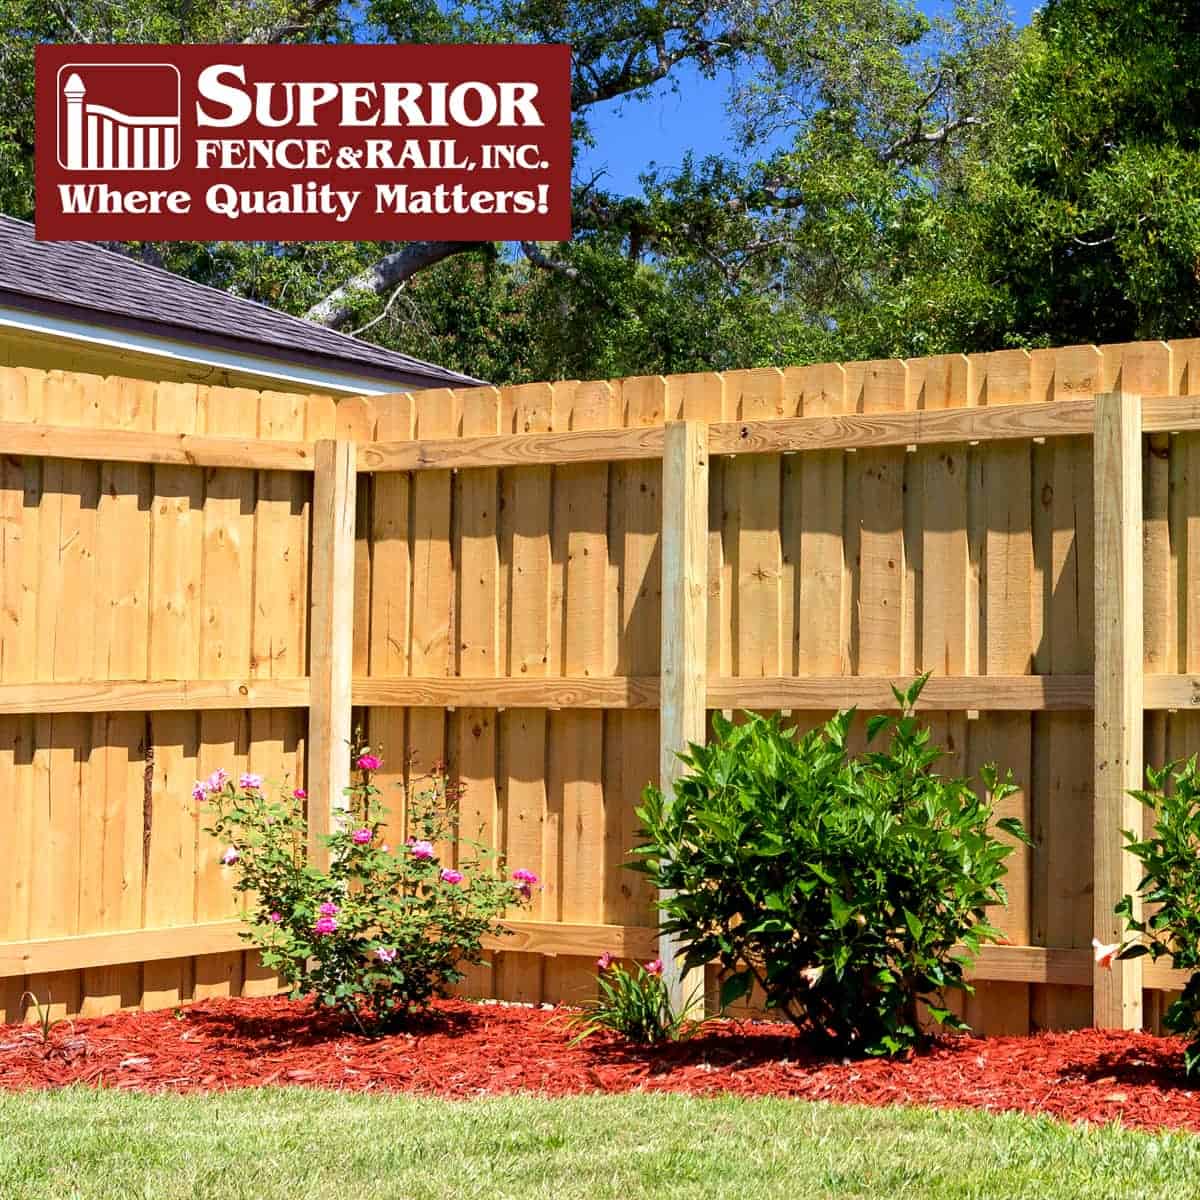 Princeton Junction fence company contractor